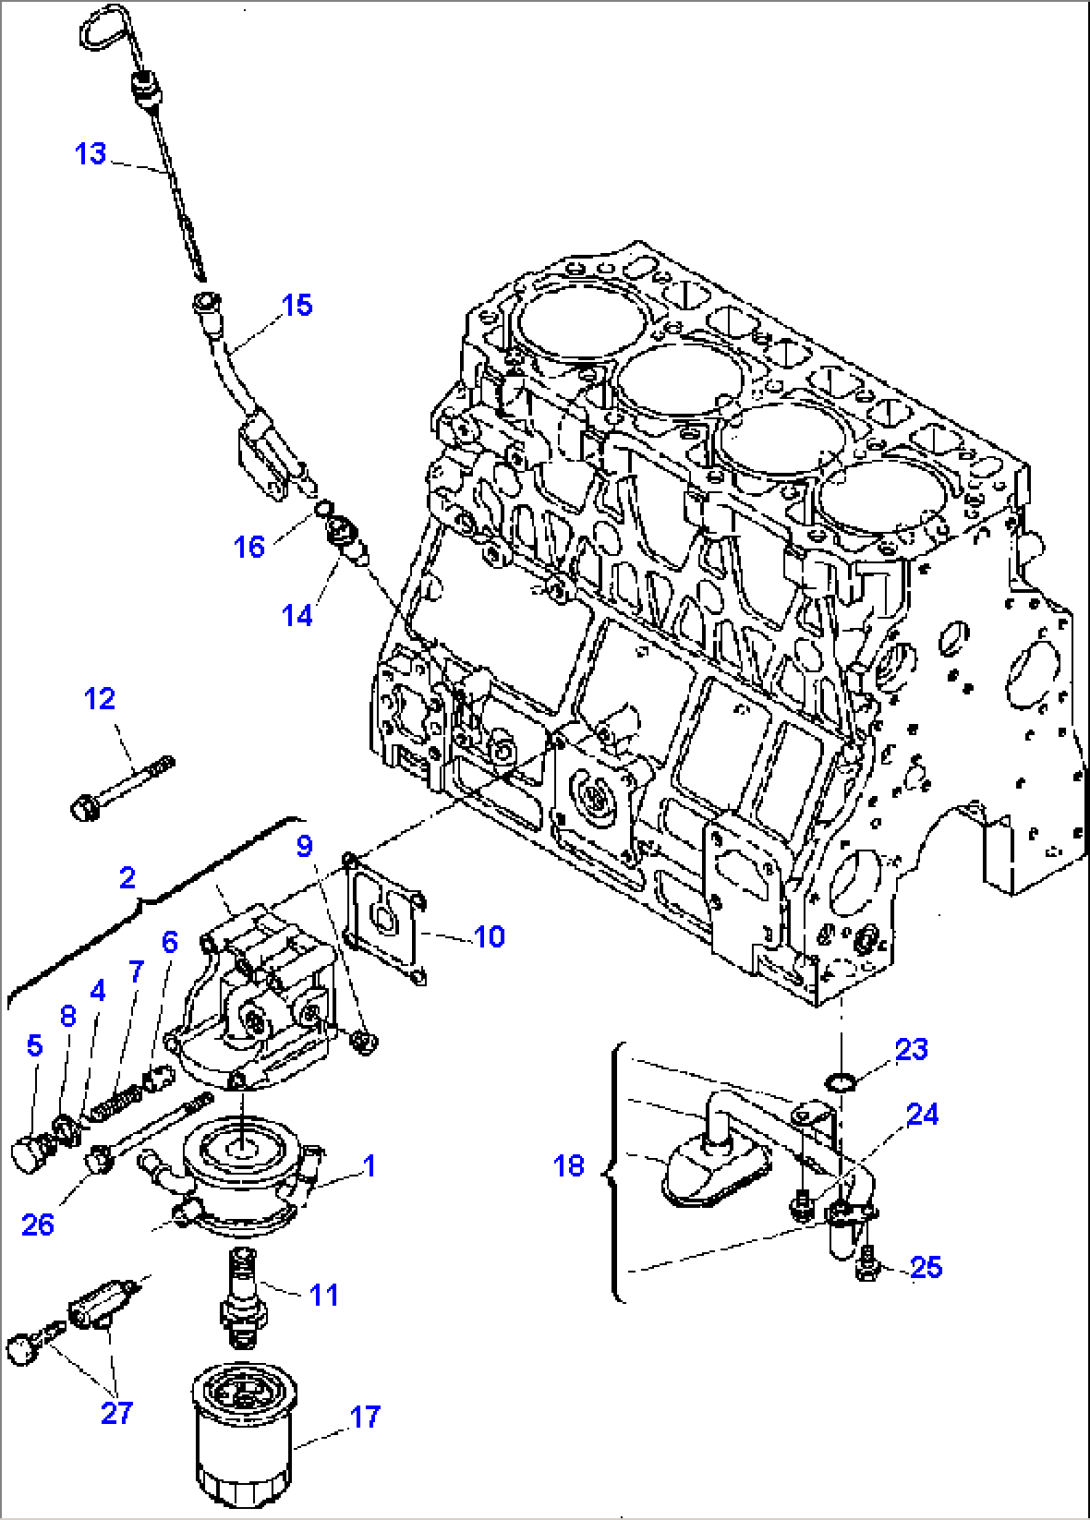 FIG. A0306-03A0 LUBRICATING OIL SYSTEM - TURBO ENGINE